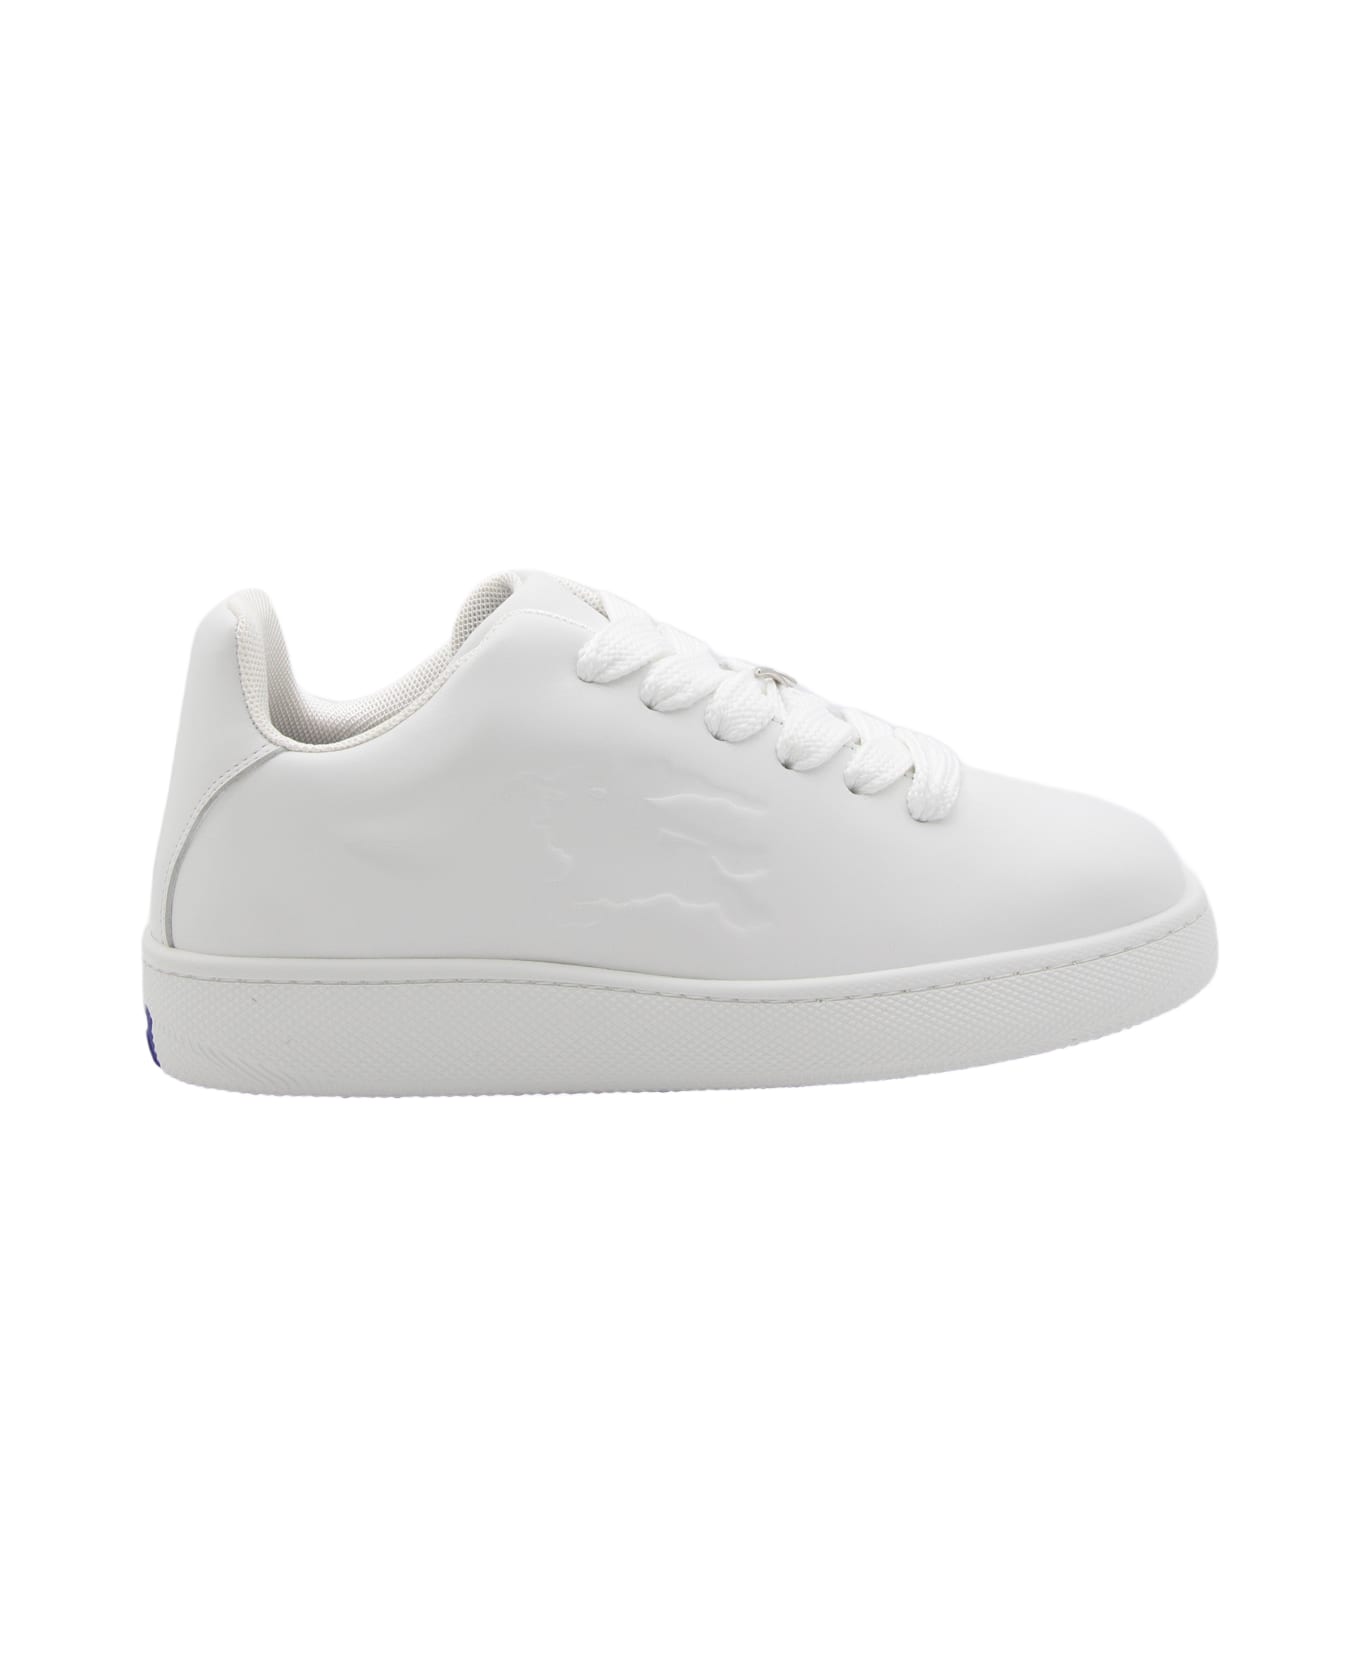 Burberry White Leather Sneakers - White